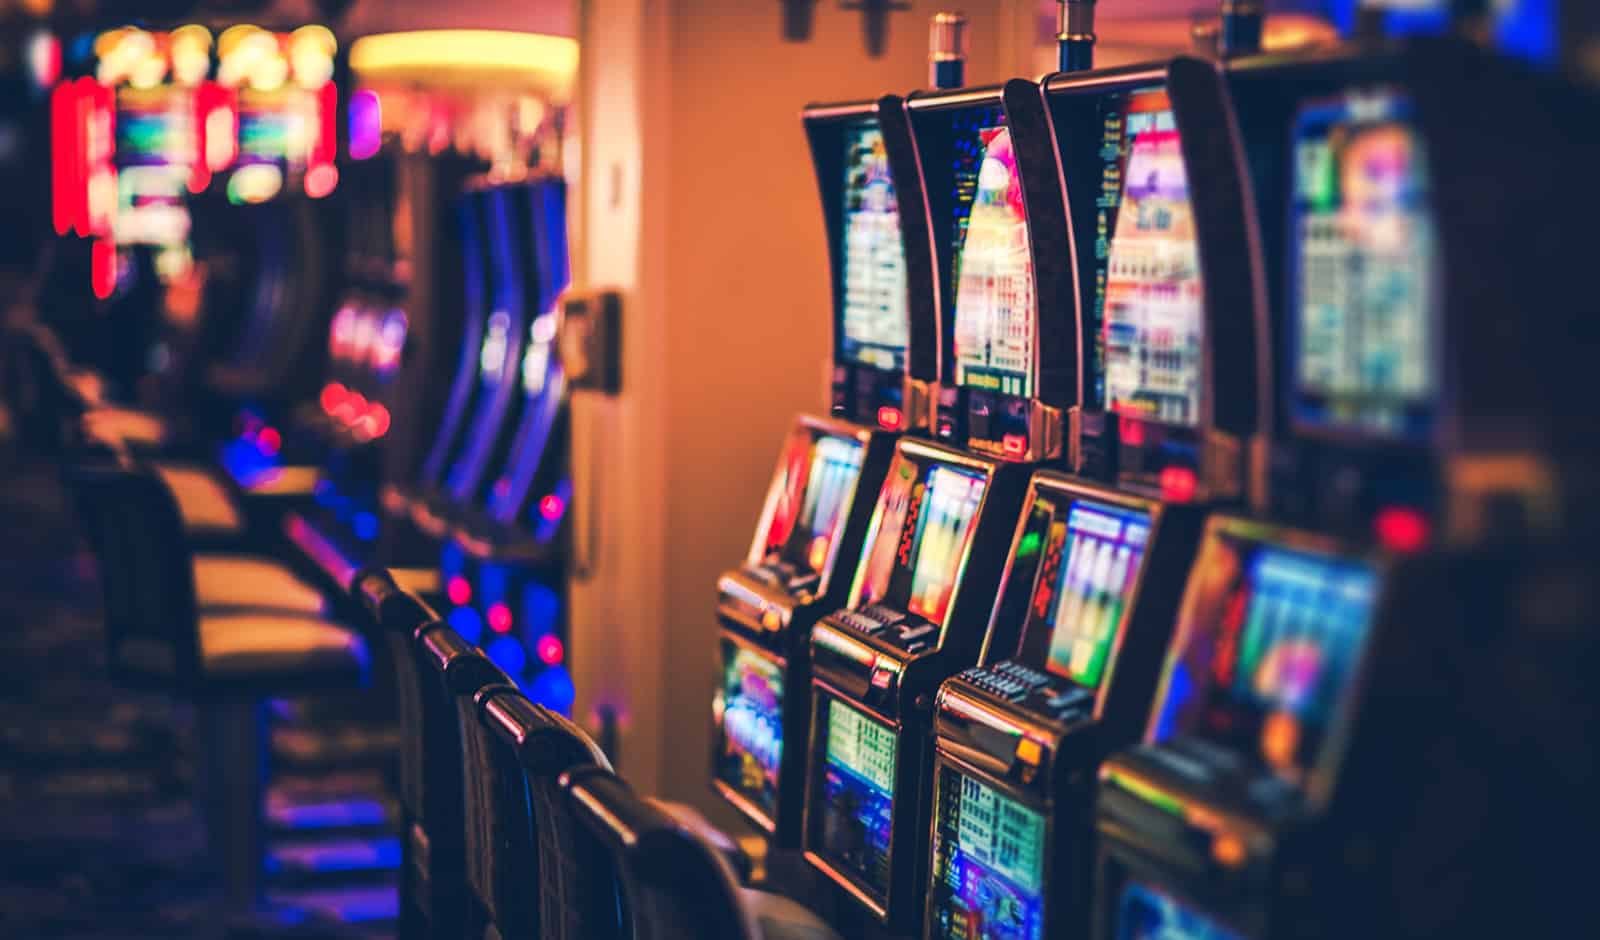 Where to Find Deposit Slot Machines